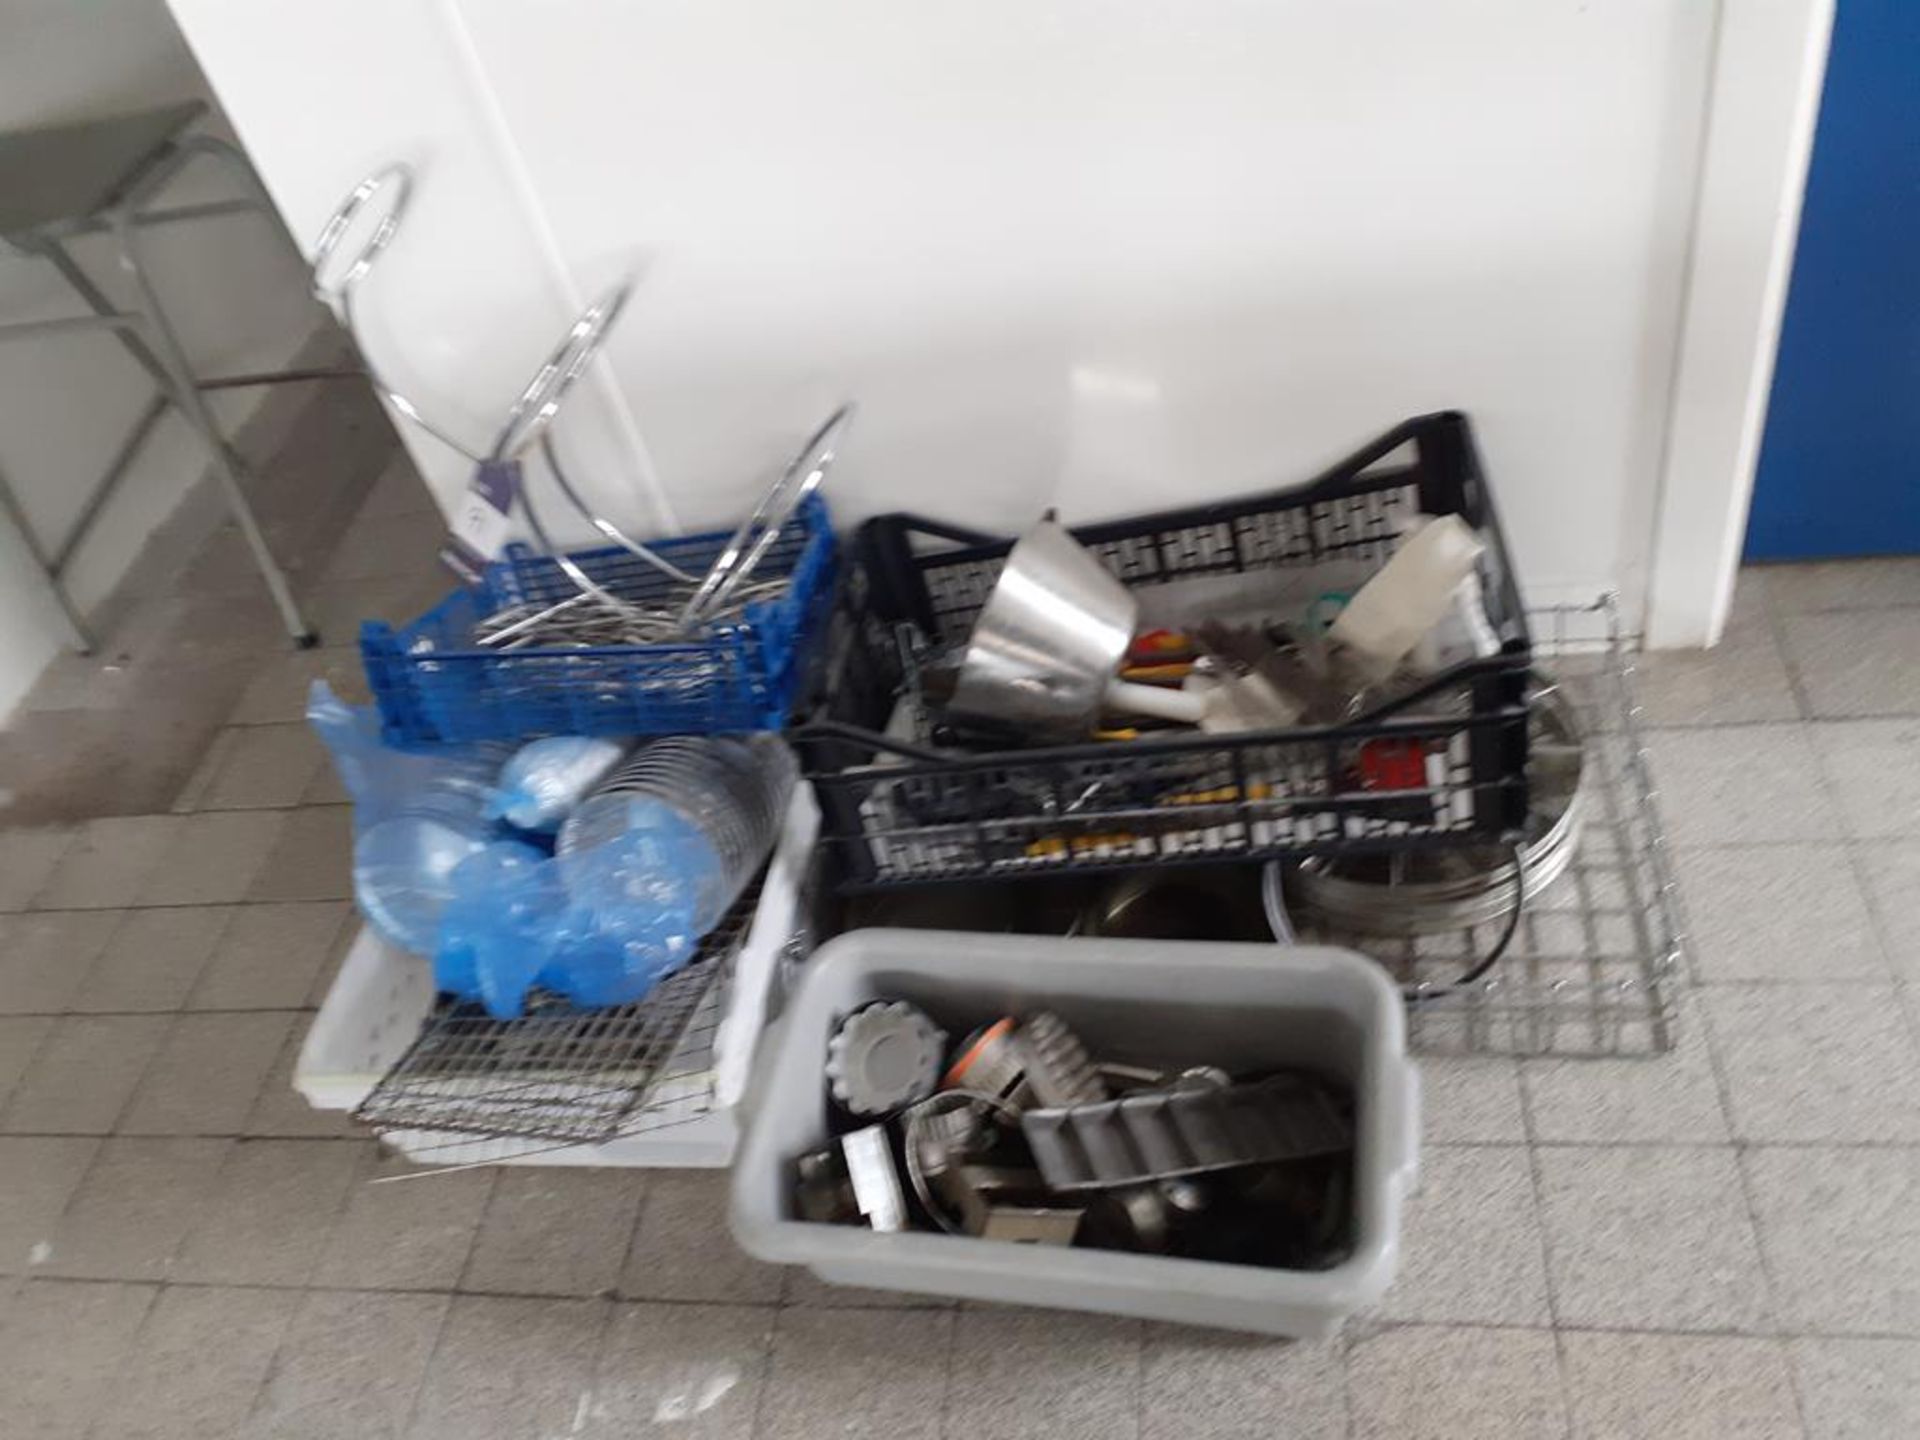 2x Serving Trolleys and Large Qty of Cookware to Inc: Pans, Trays, Pots etc. - Image 12 of 12